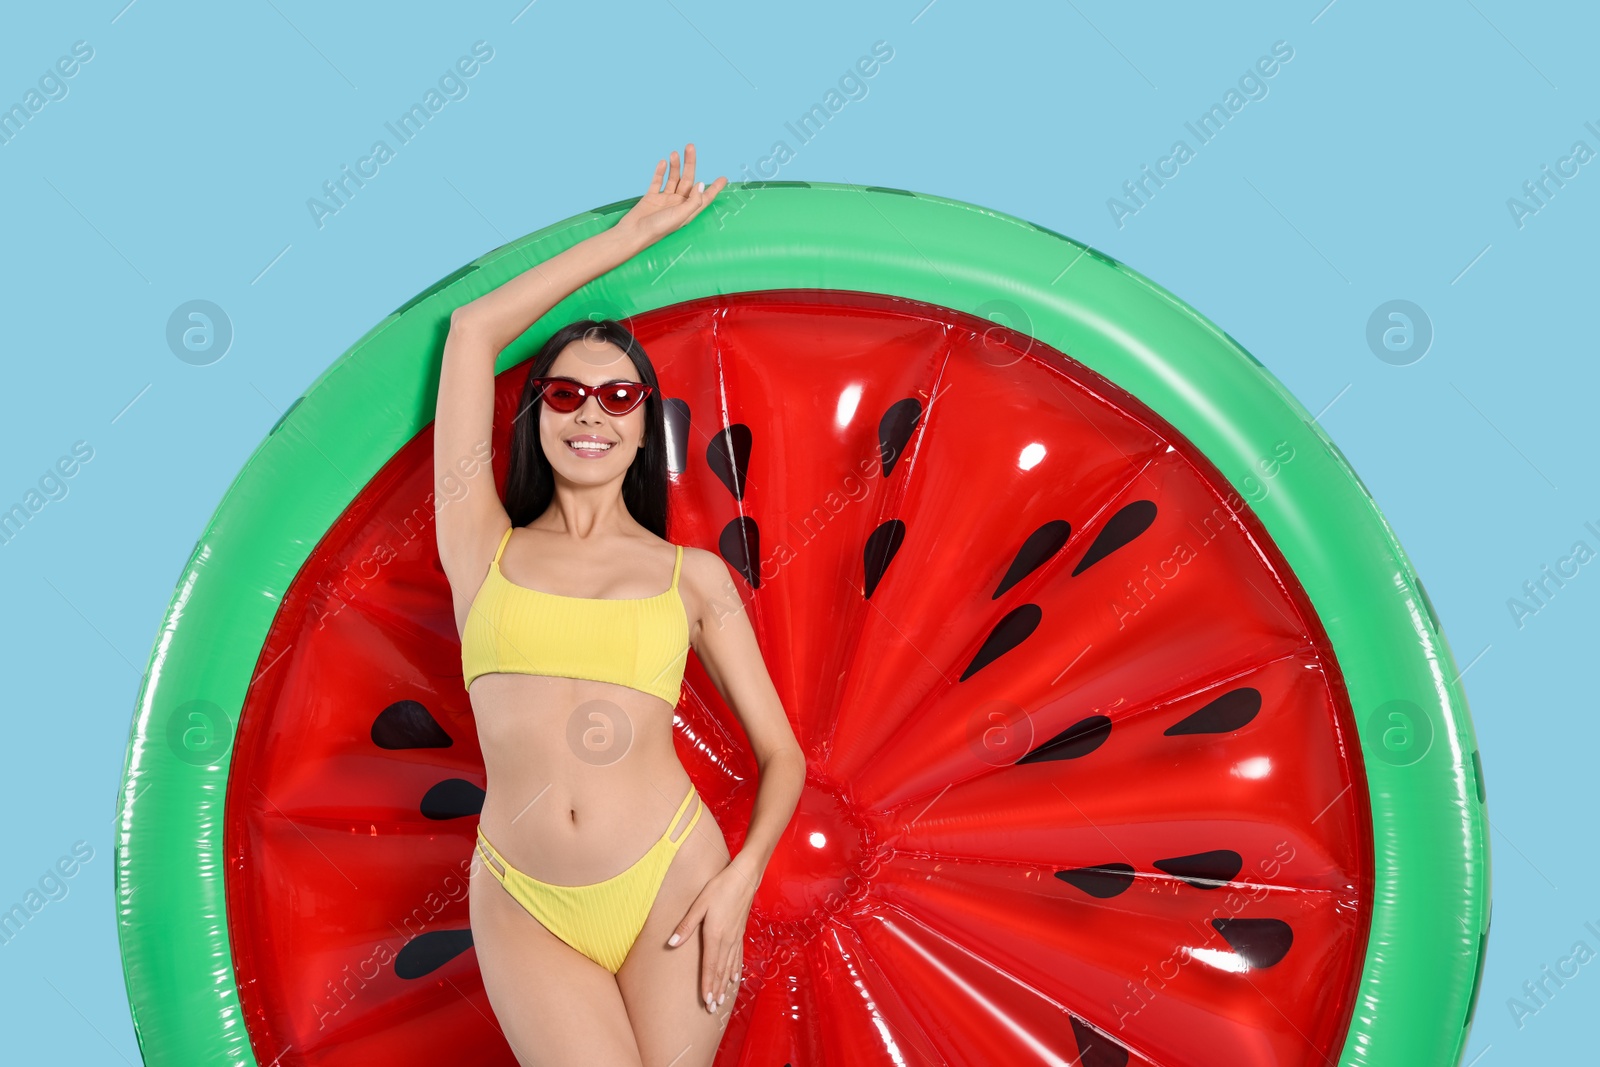 Photo of Young woman in stylish swimsuit near inflatable mattress against light blue background